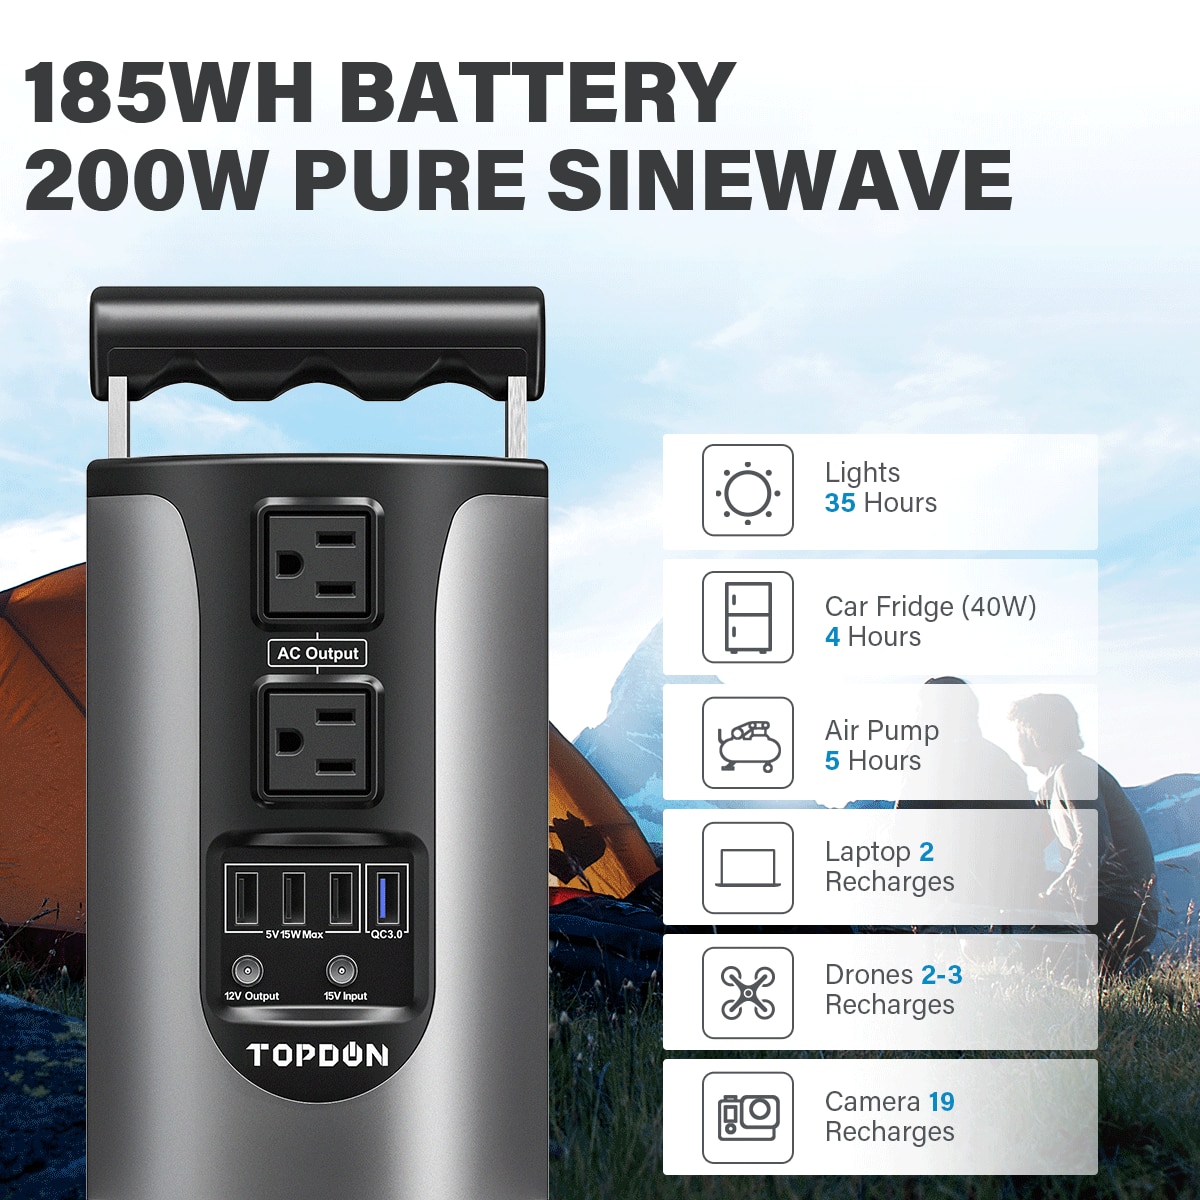 185WH Topdon H200 Portable Energy Storage Power Supply Power Bank 18W QC3.0 Waterproof Power Storage 200W PURE SINEWAVE Charger